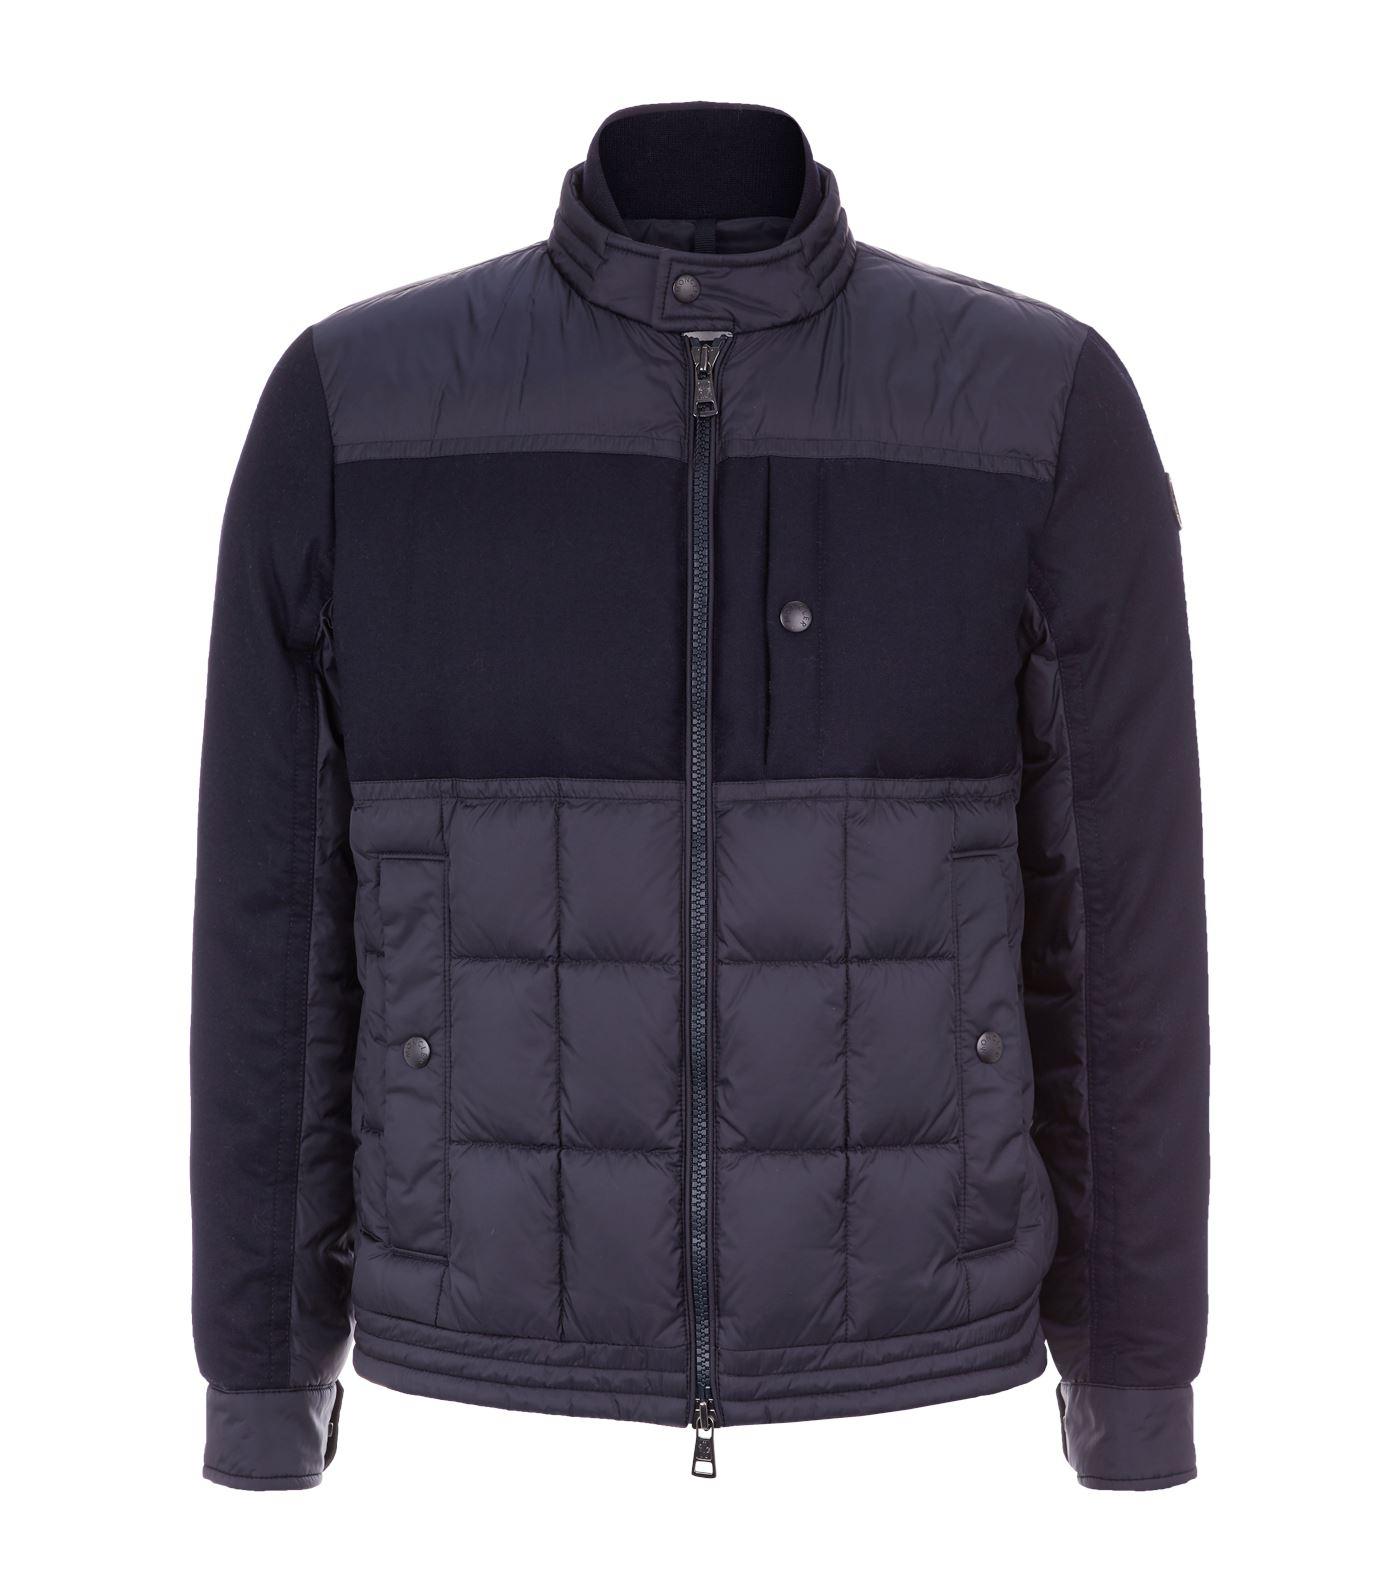 Moncler Wool Baptieu Quilted Jacket in Navy (Blue) for Men - Lyst